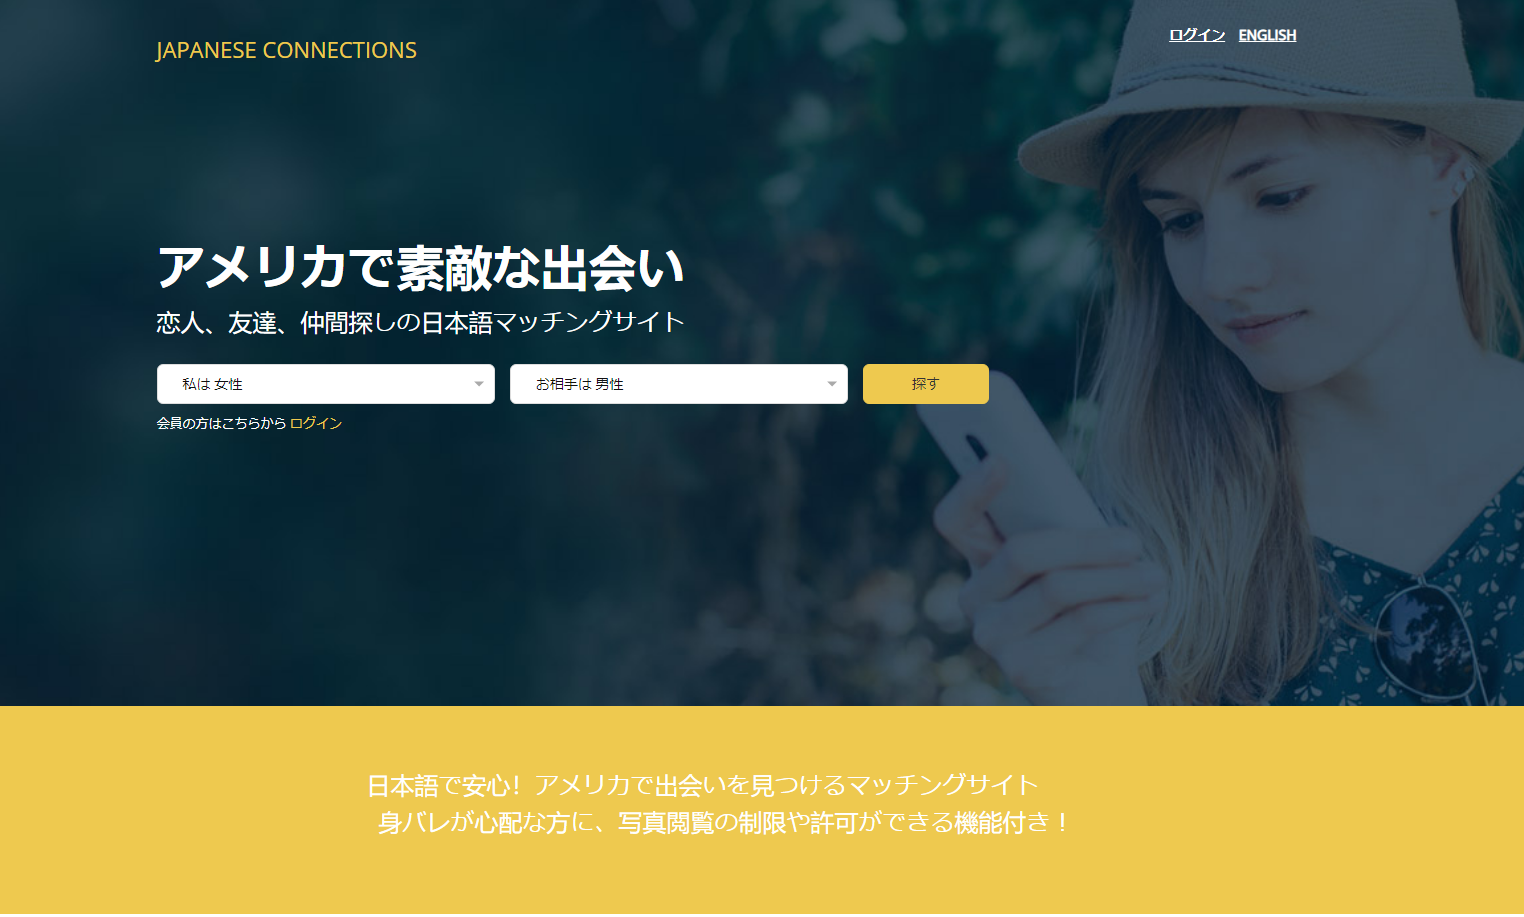 Japaneseconnections website